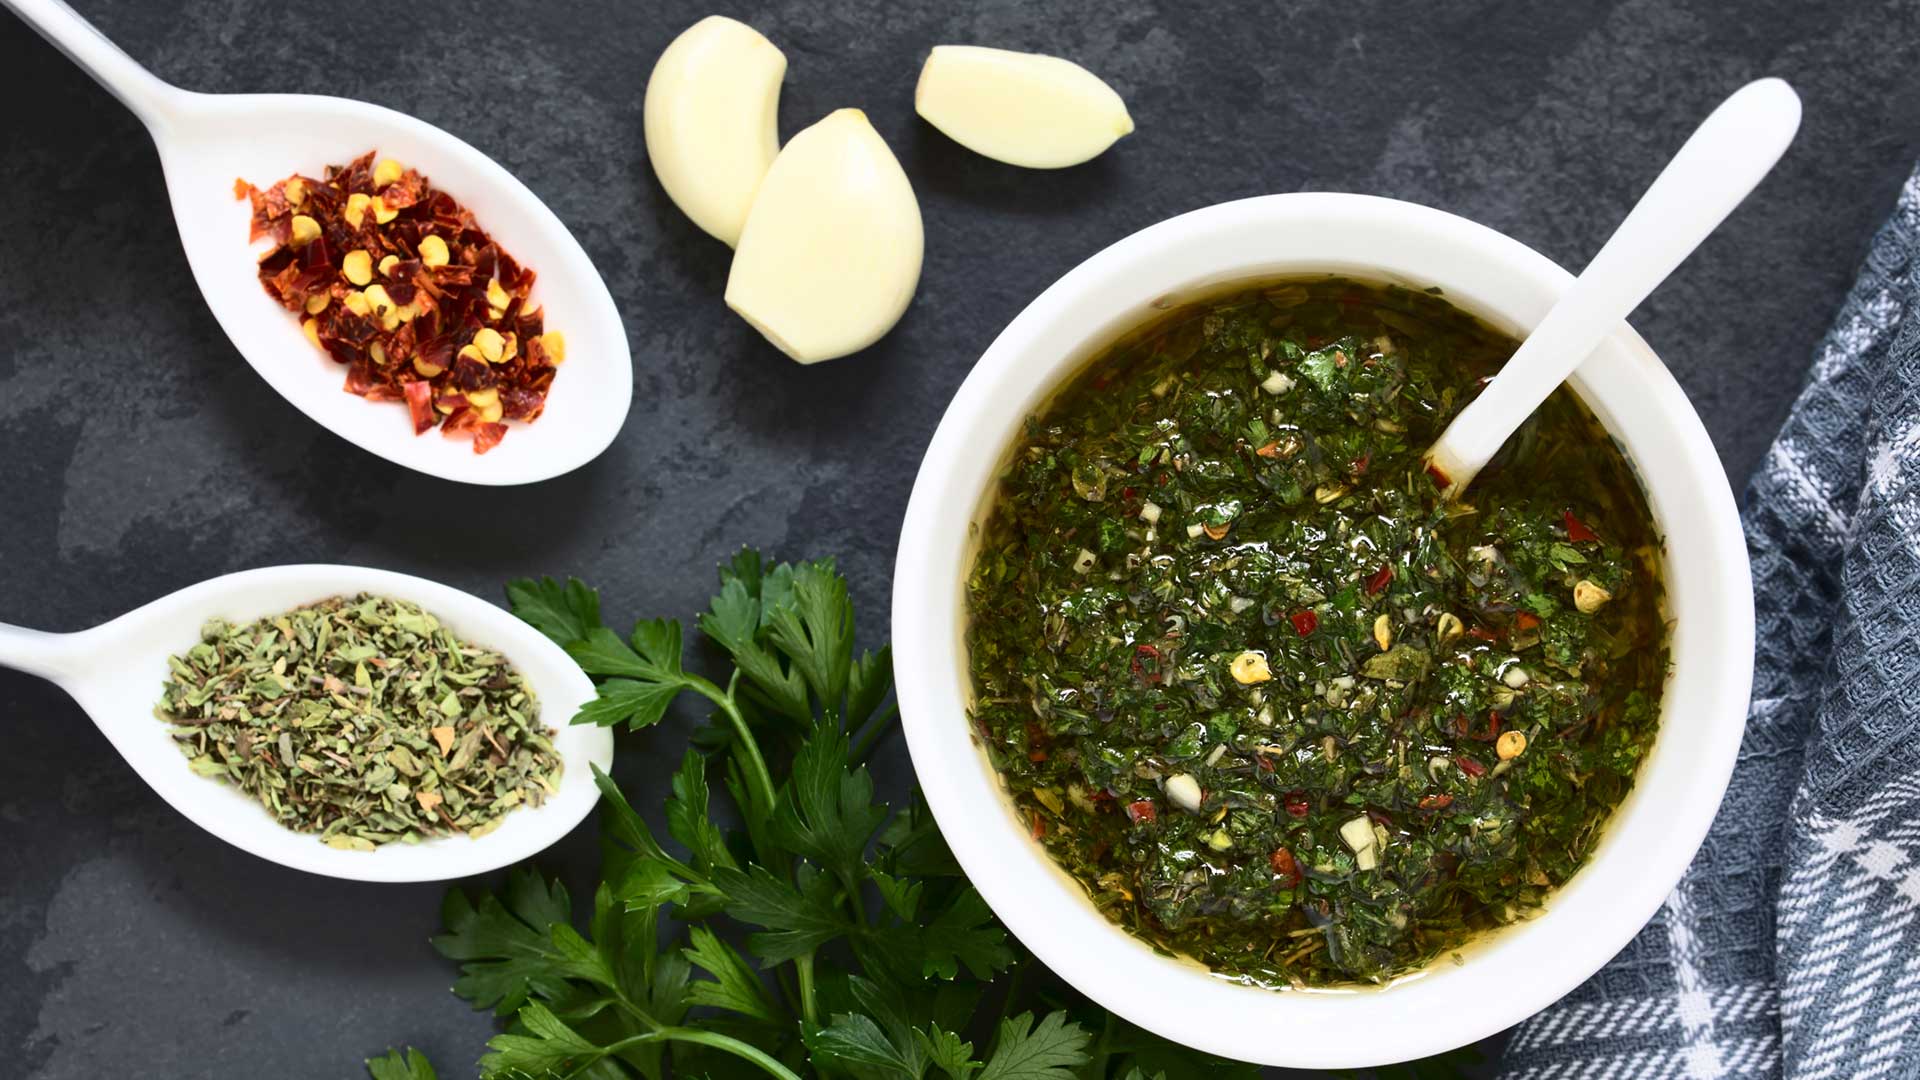 Green chimichurri sauce in a white dish on a blue cloth, surrounded by herbs, dried chillies and garlic